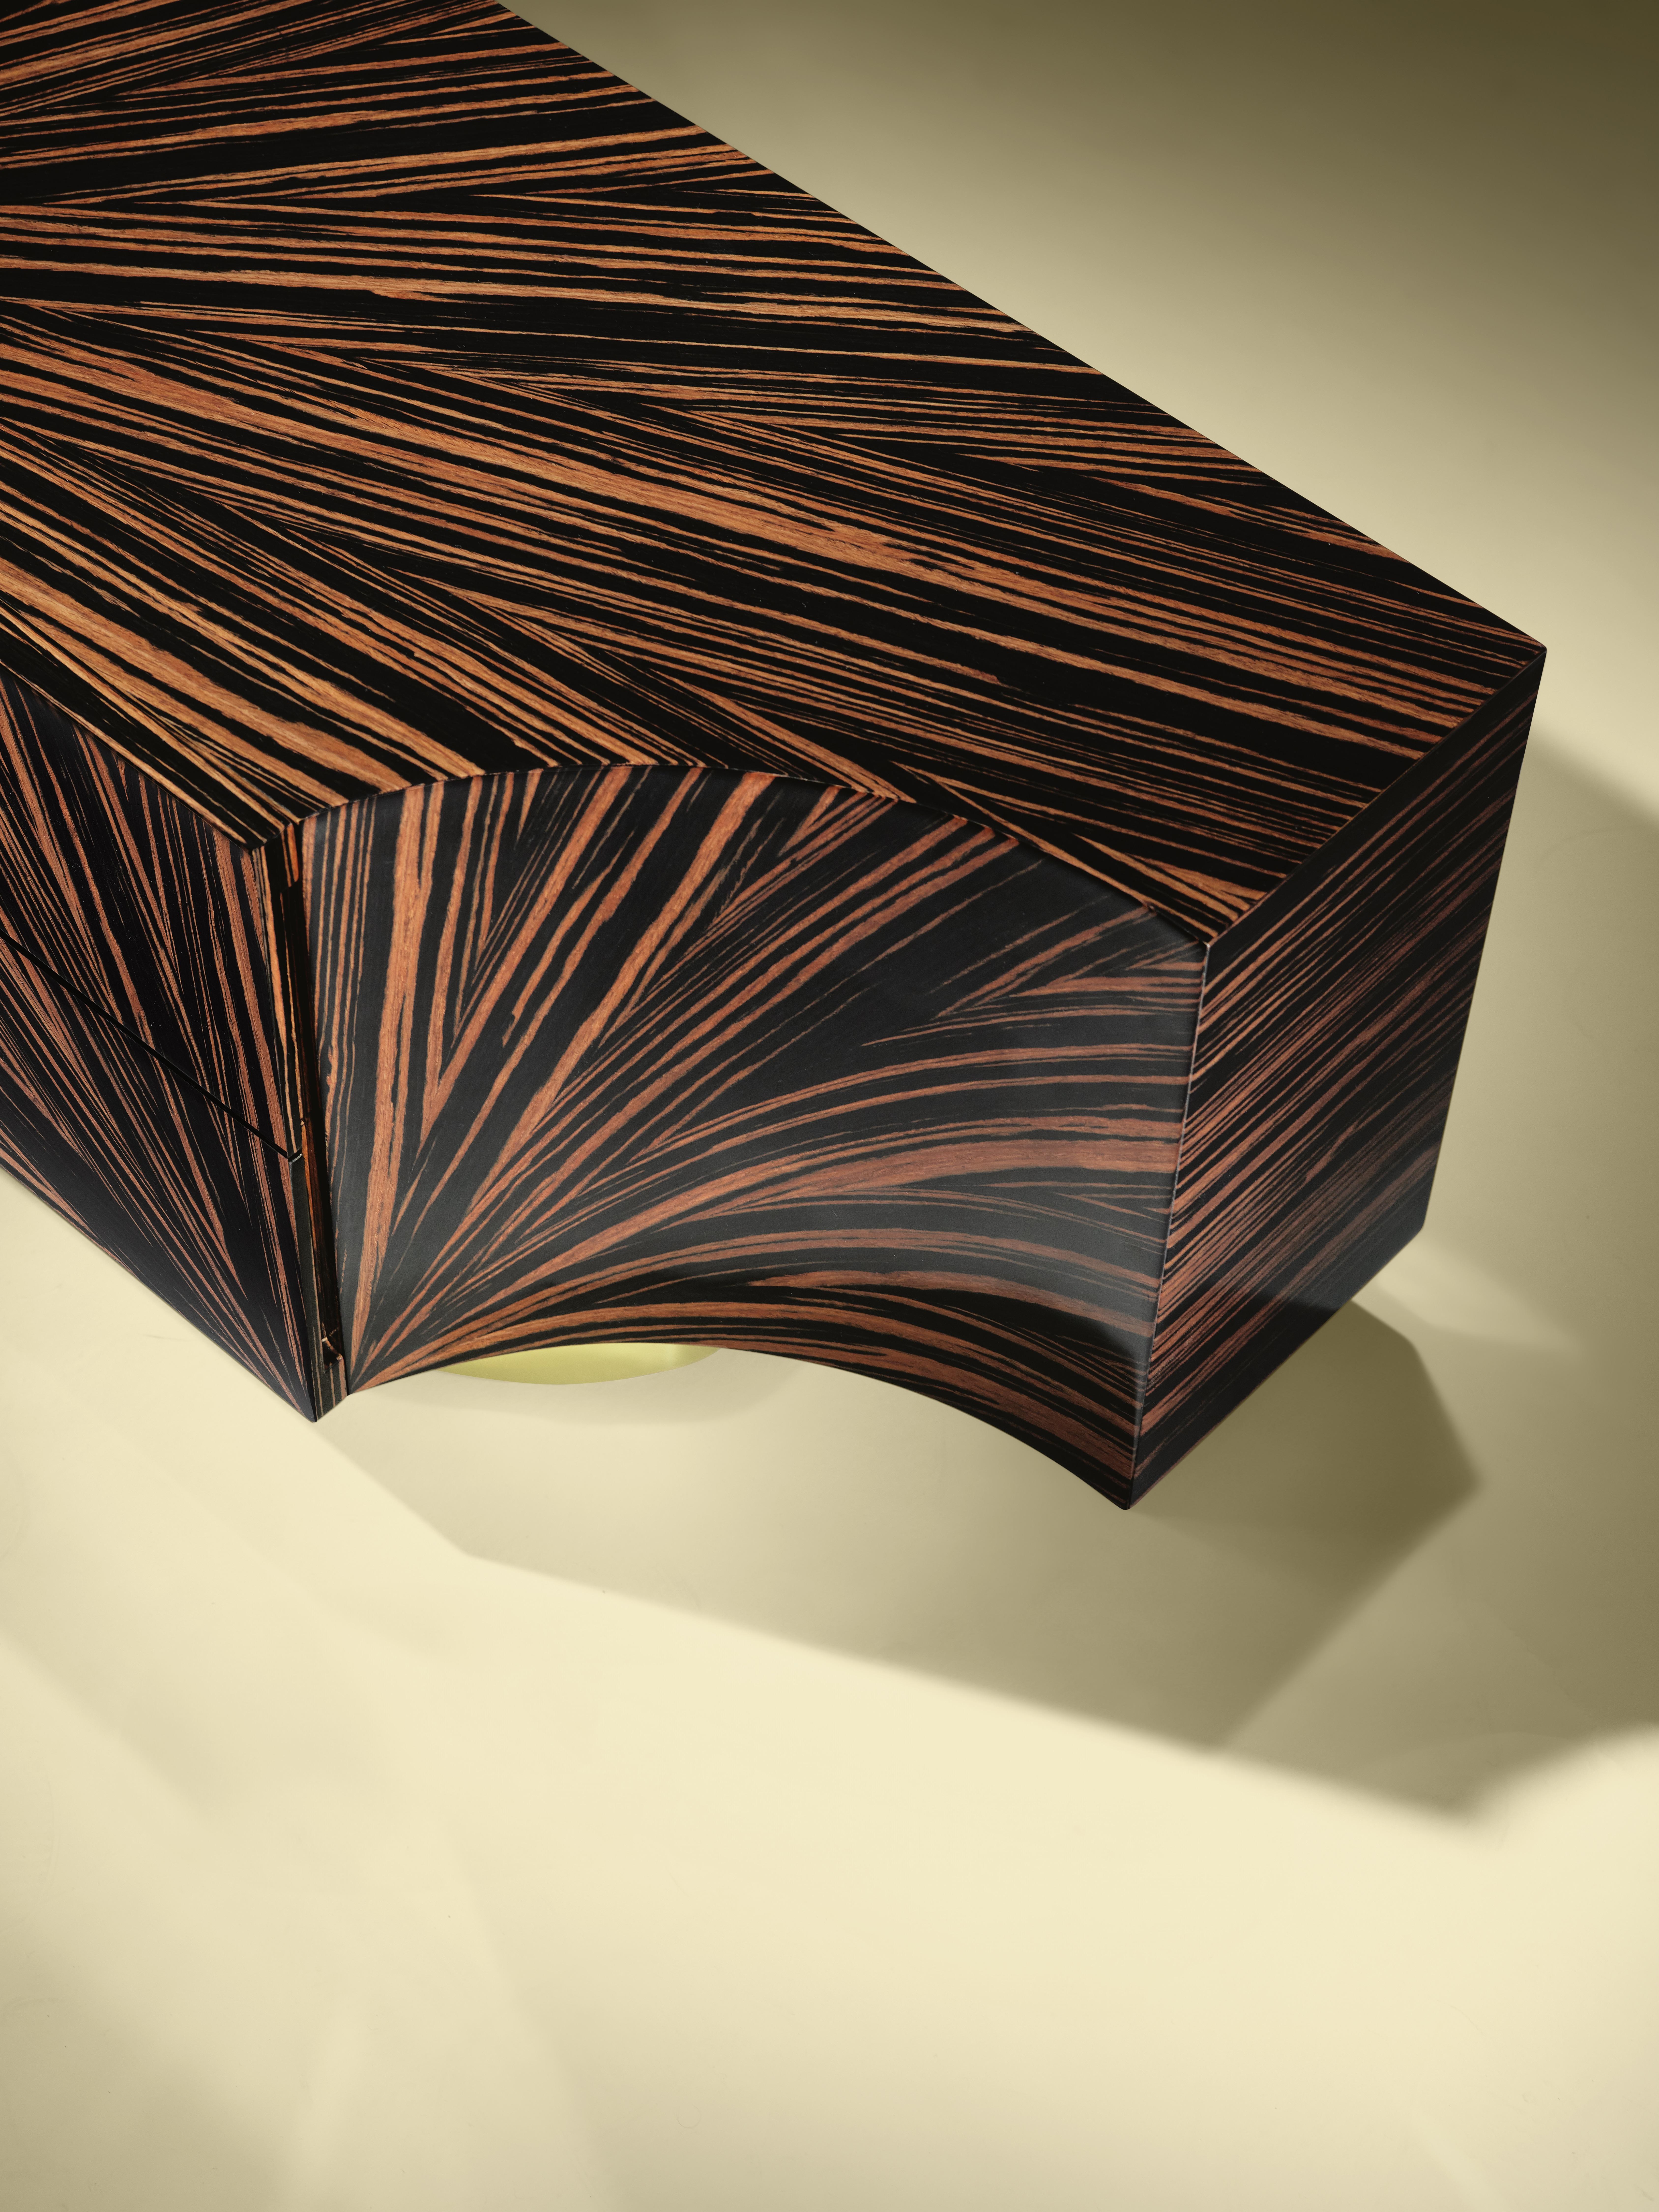 Bedside table in ebony with marquetry technique and metal base.

Bespoke / customizable
Identical shapes with different sizes and finishing’s.
All RAL colors available. (Mate / half gloss / gloss).